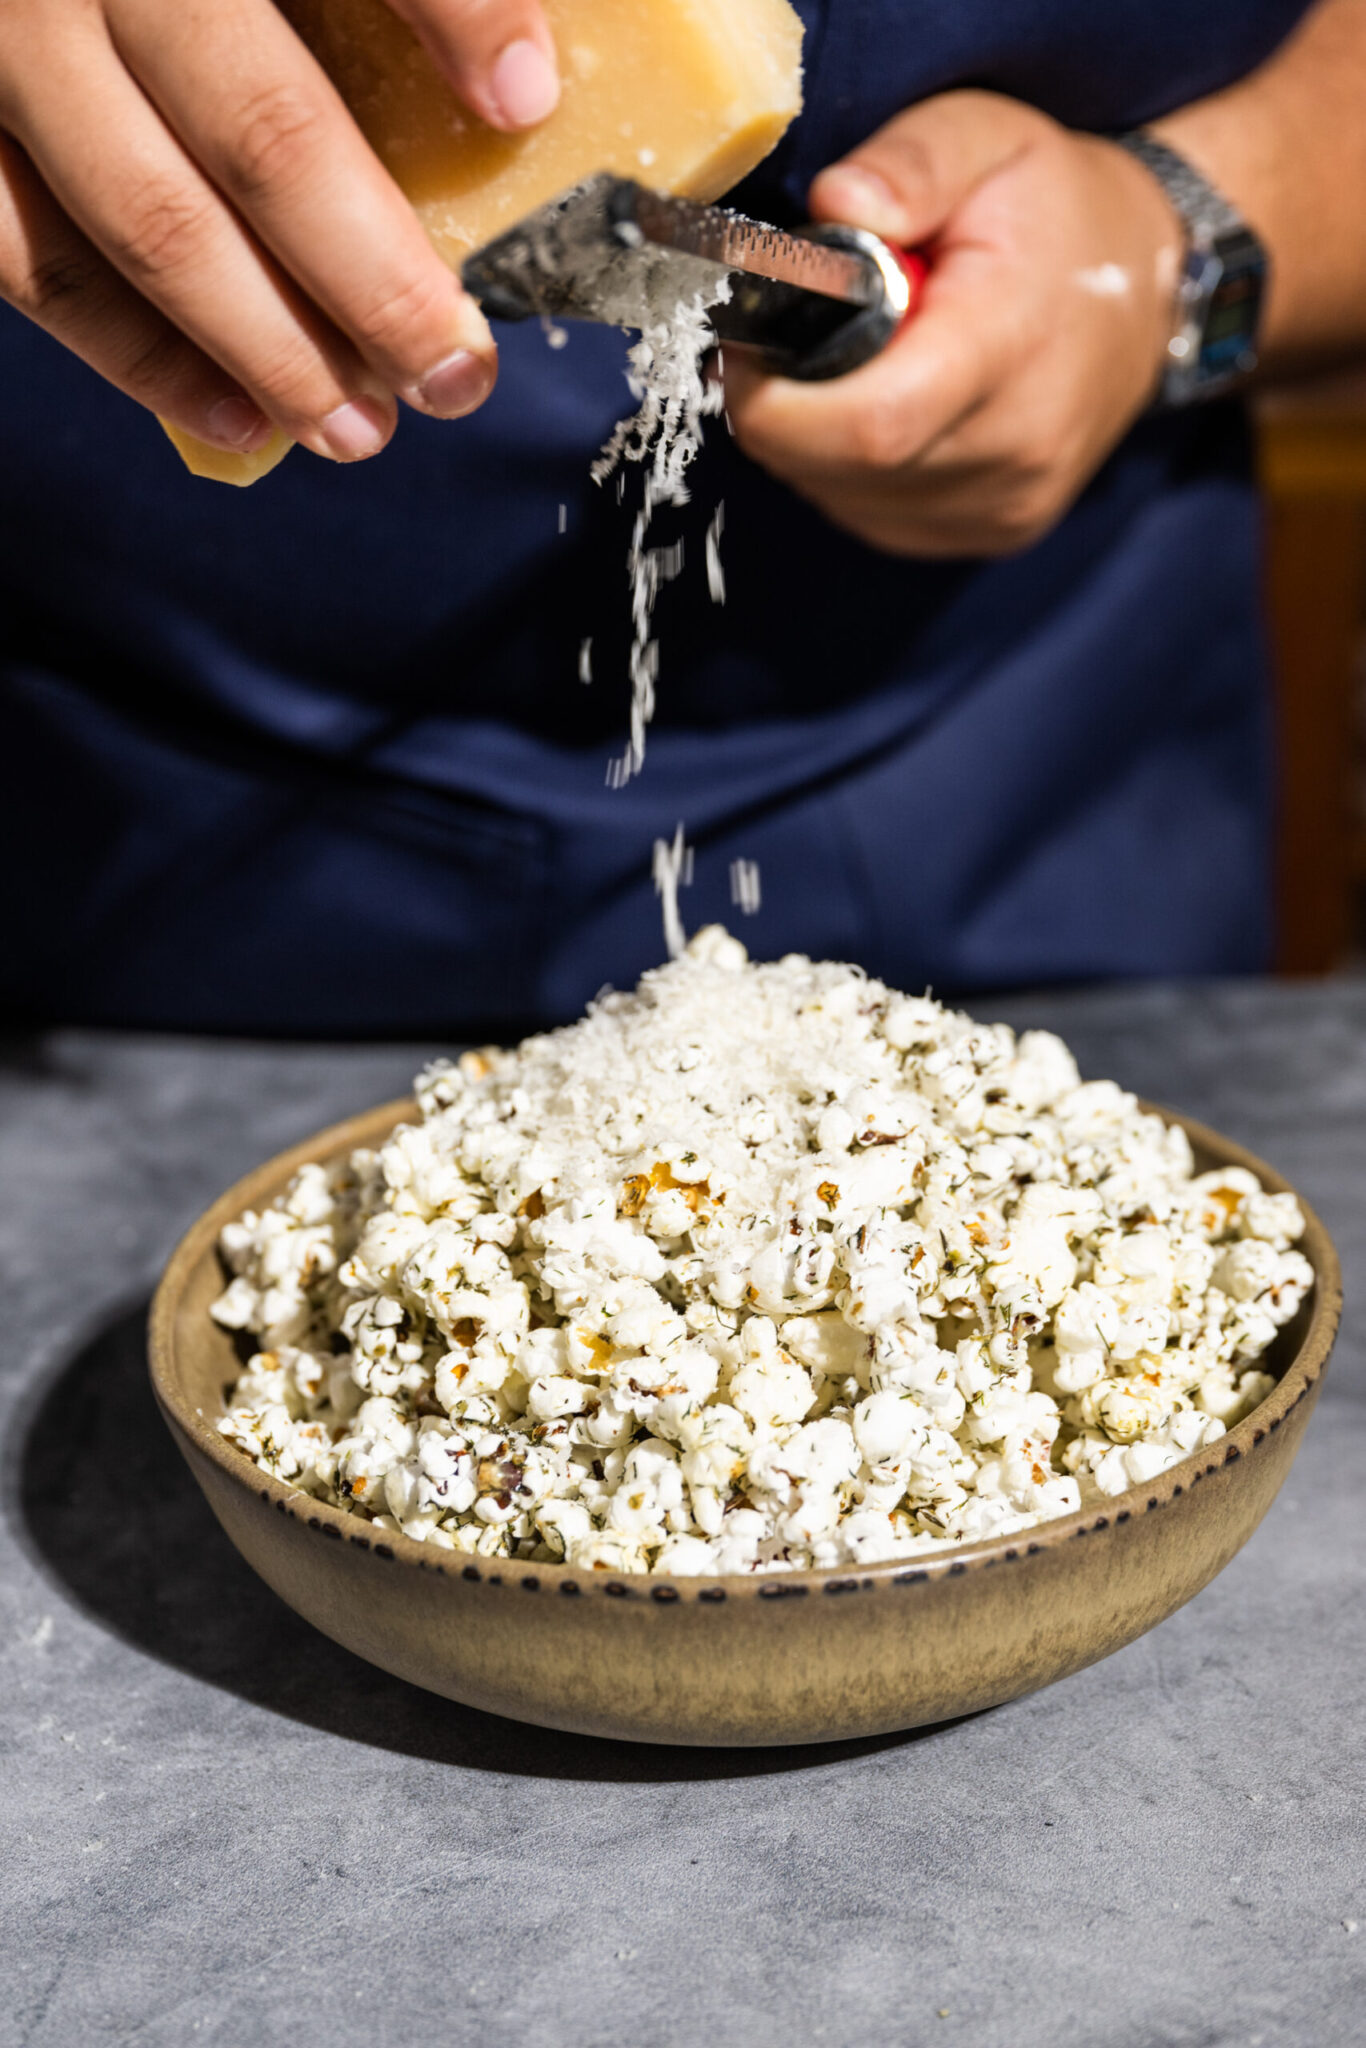 Grating Parmesan cheese on Herbed Weed Popcorn in a bowl